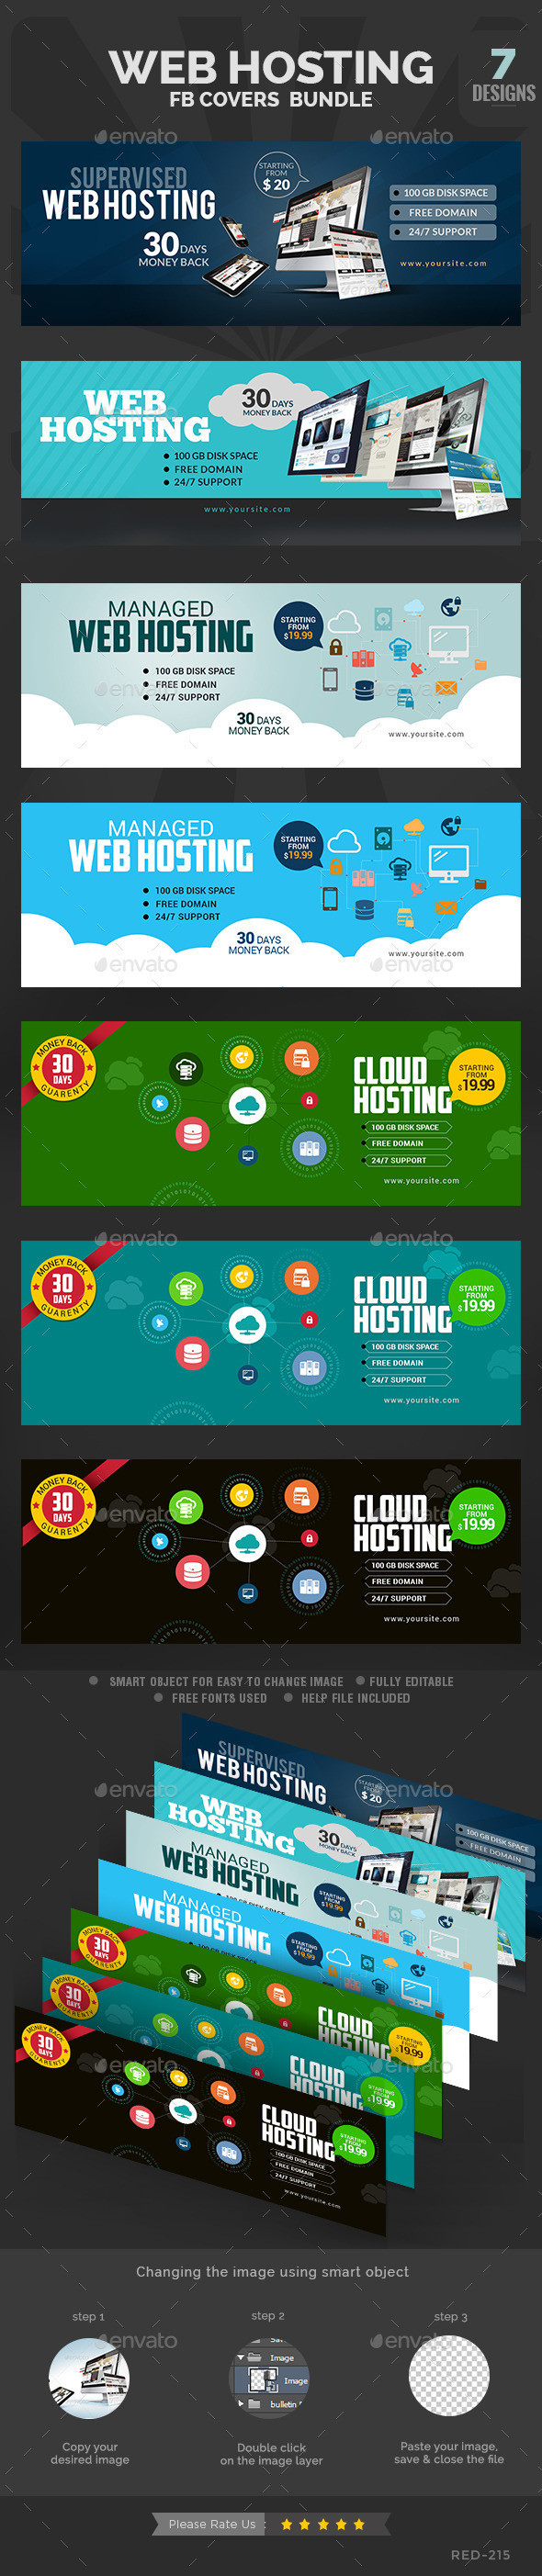 Red 215 web 20hosting 20fb 20cover 20bundle preview